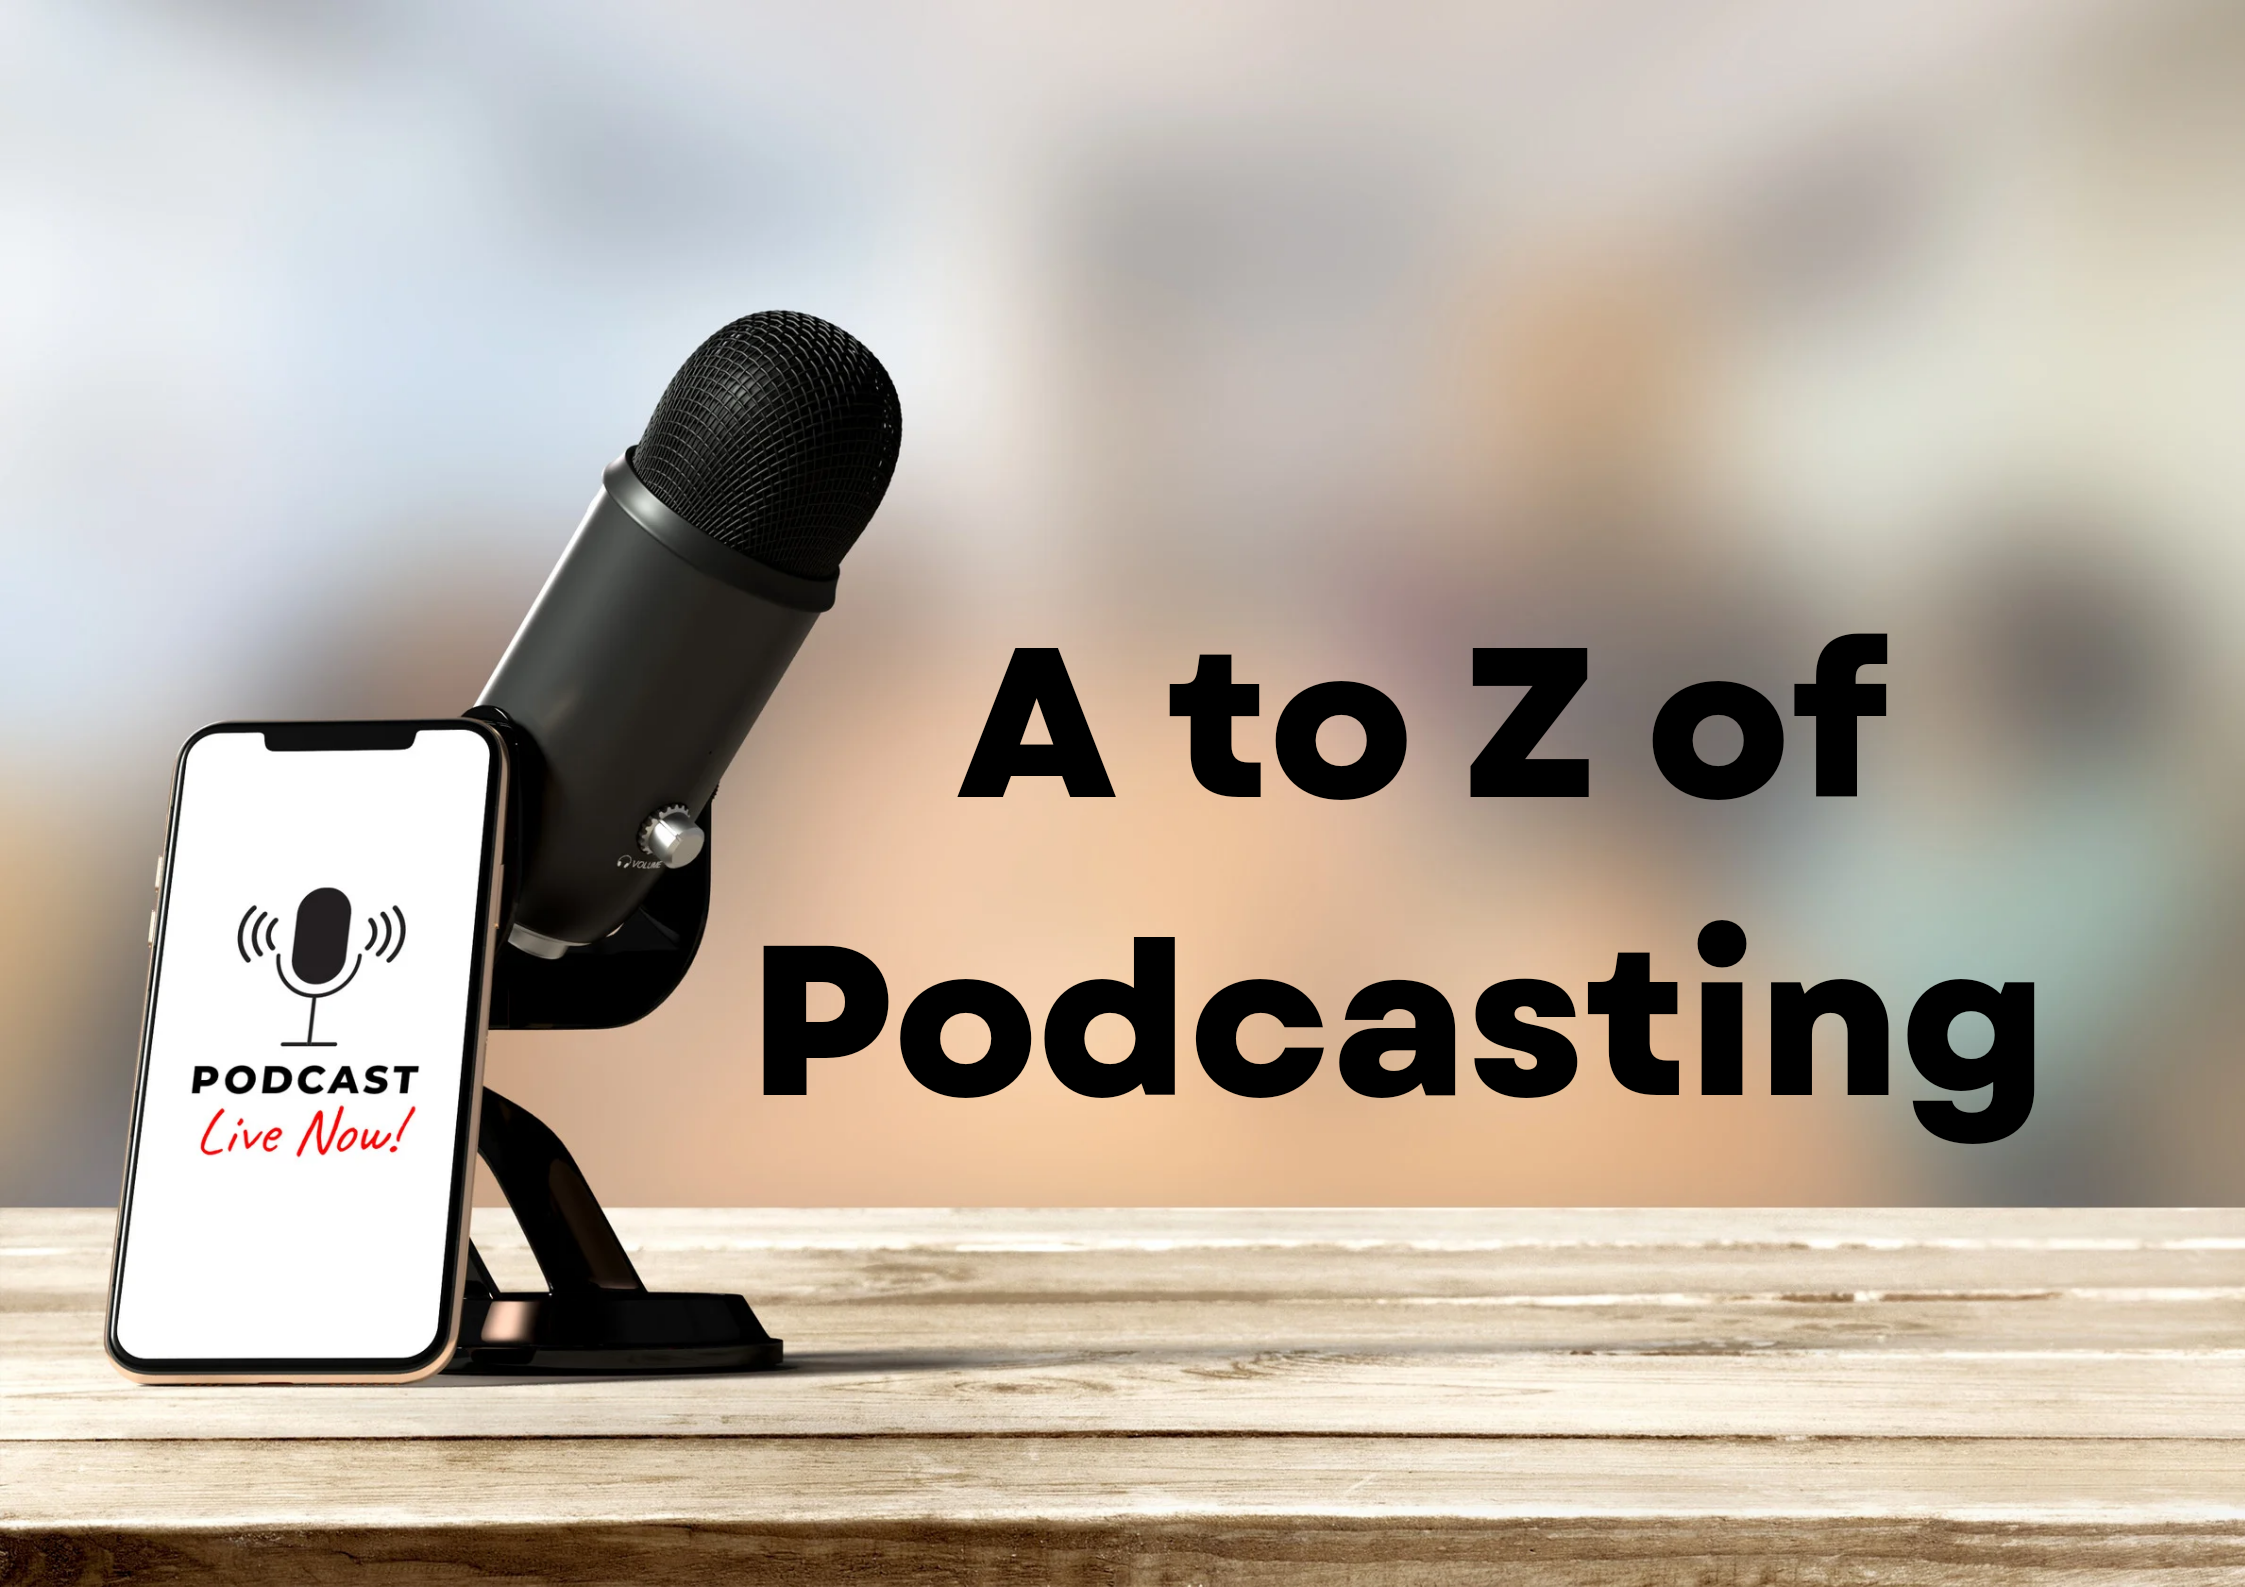 A to Z of Podcasting